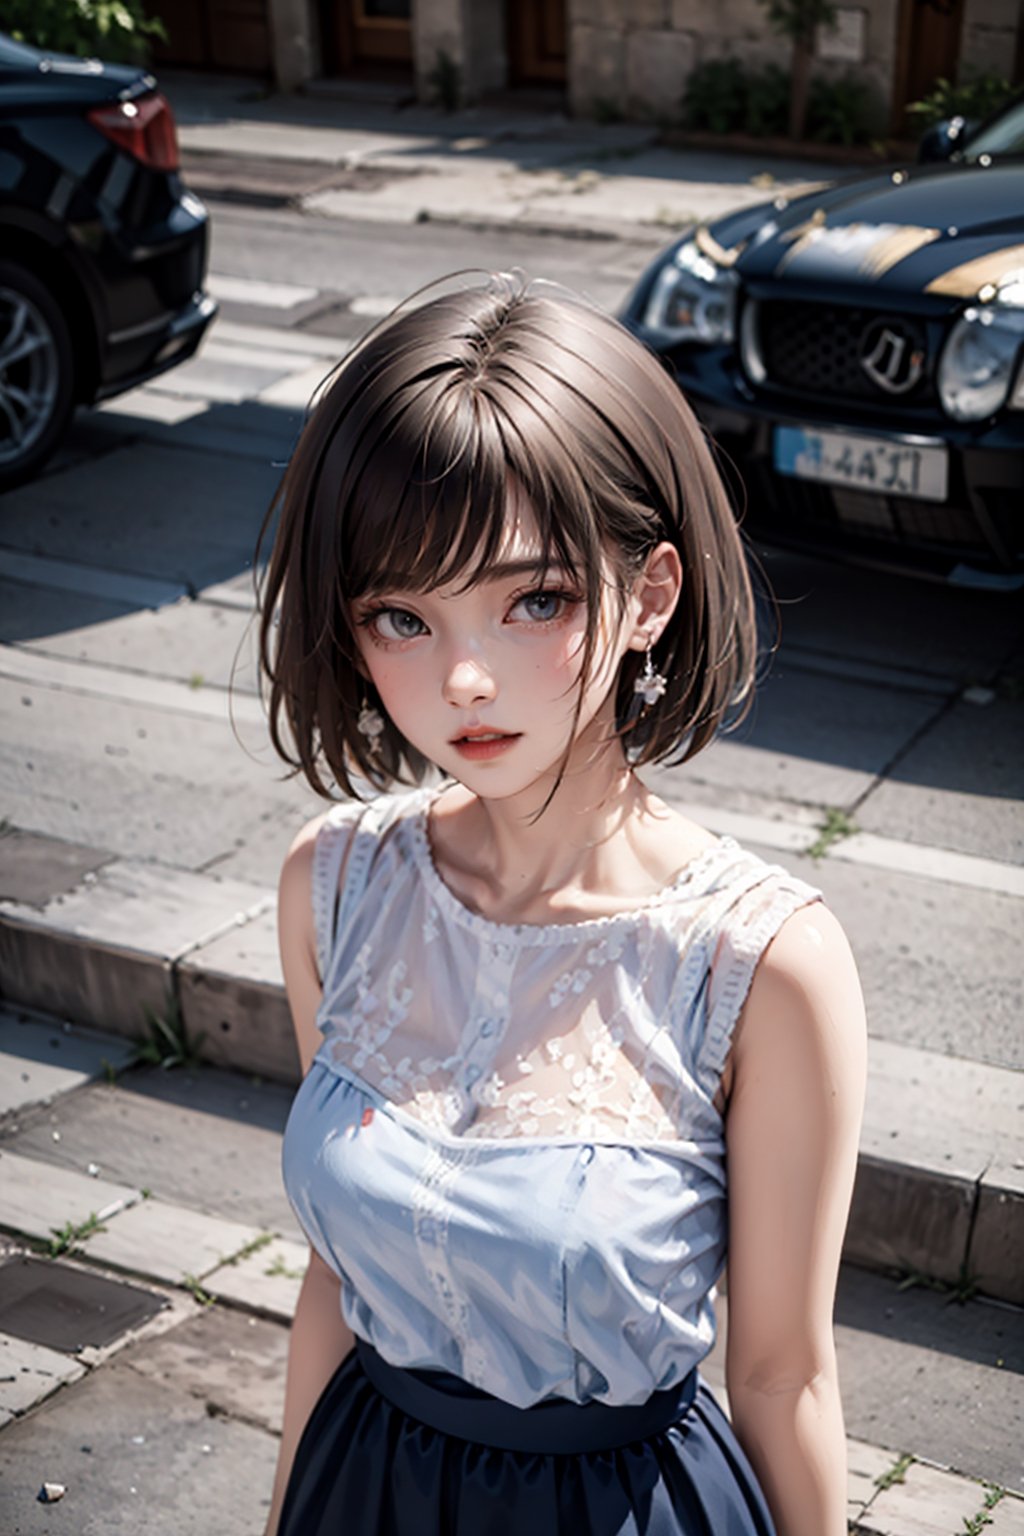  8k,masterpiece,best quality,short-haired girl with brown hair, realistic face,city scape, sweater_dress,aroused_face,8K resolution, in a realistic setting,body shot, with a realistic background, 3Dcinematic,chillout mix,lighting,browneyes,Multiple_earrings,